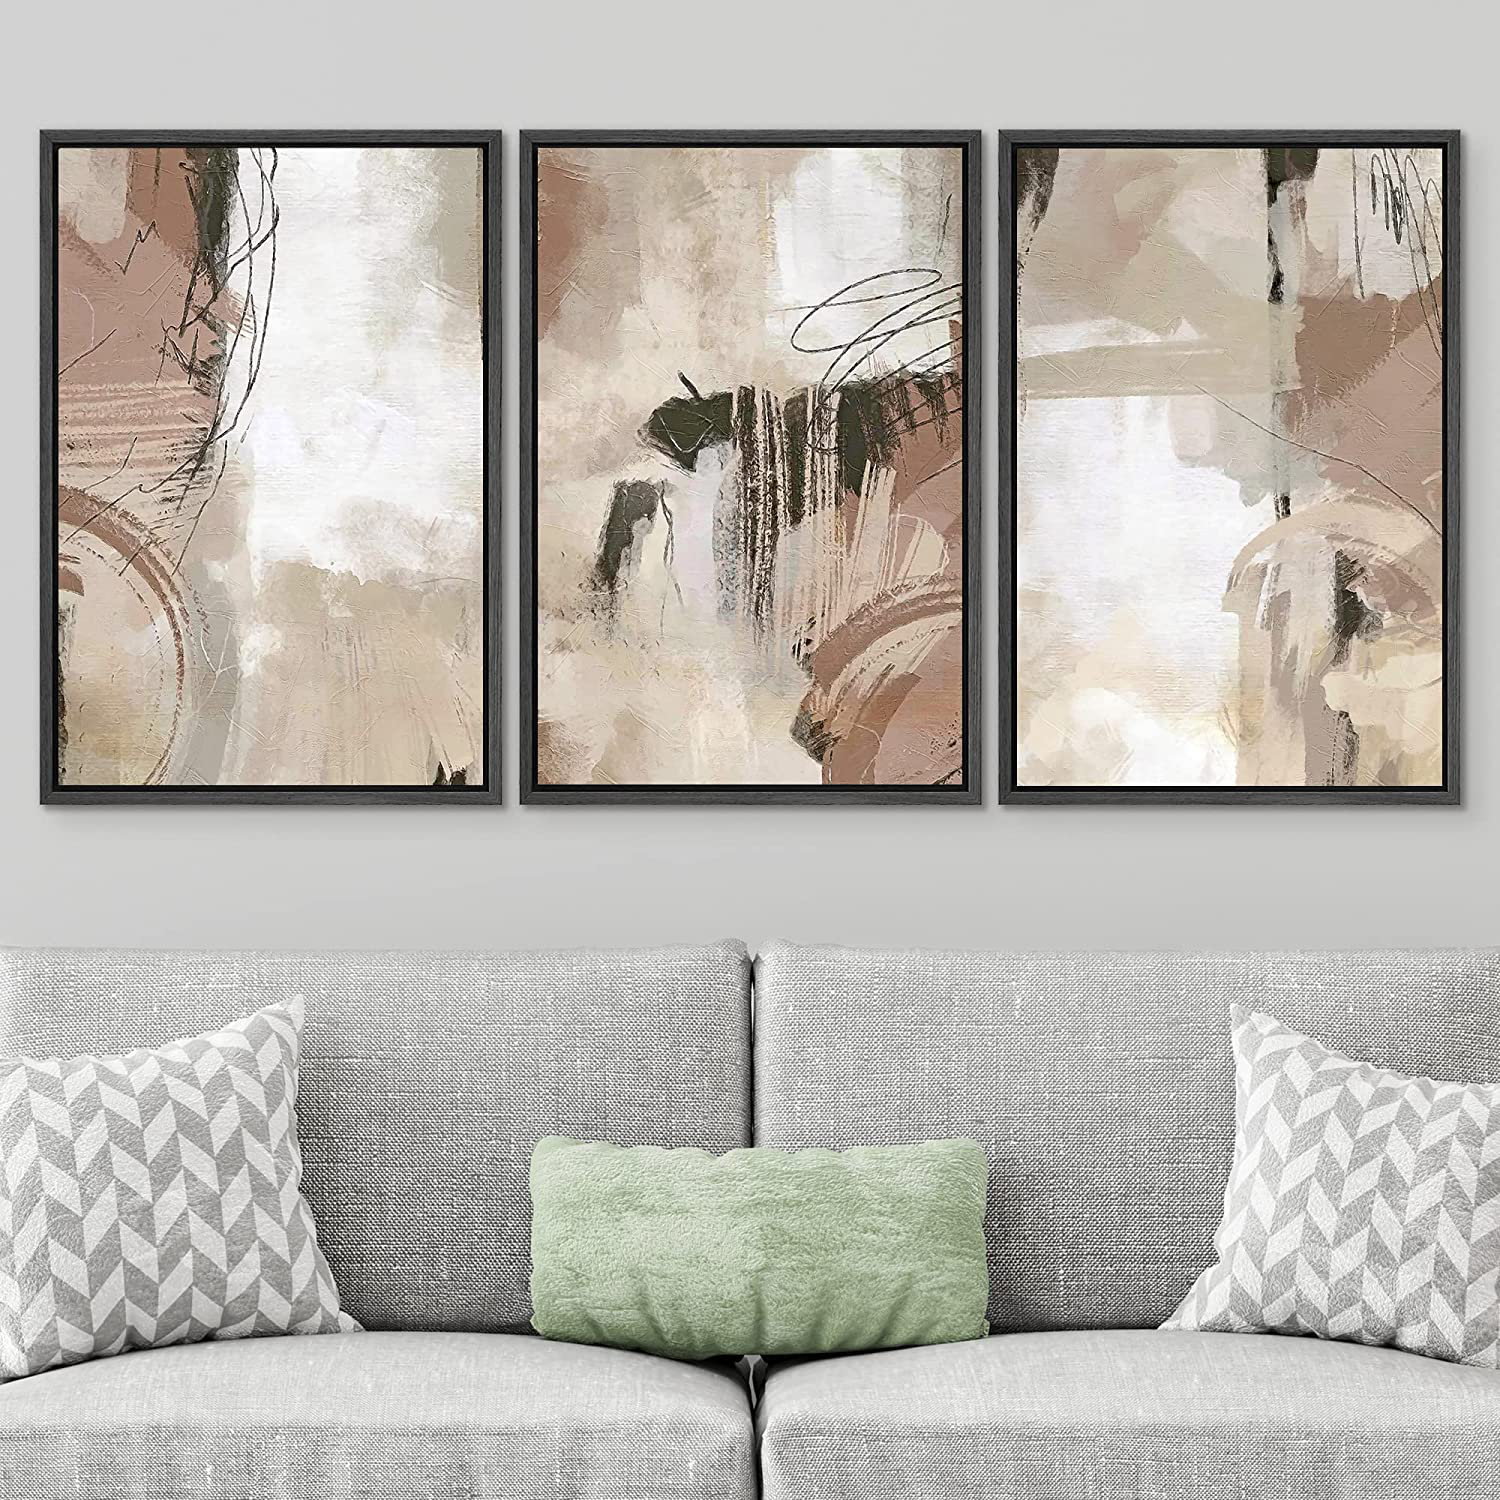 It's so Good to Be Home Print Living Room Decor Wall Art Above Couch Wall  Decor Print Quote Bedroom Prints Set of 2 Hallway Prints Download 